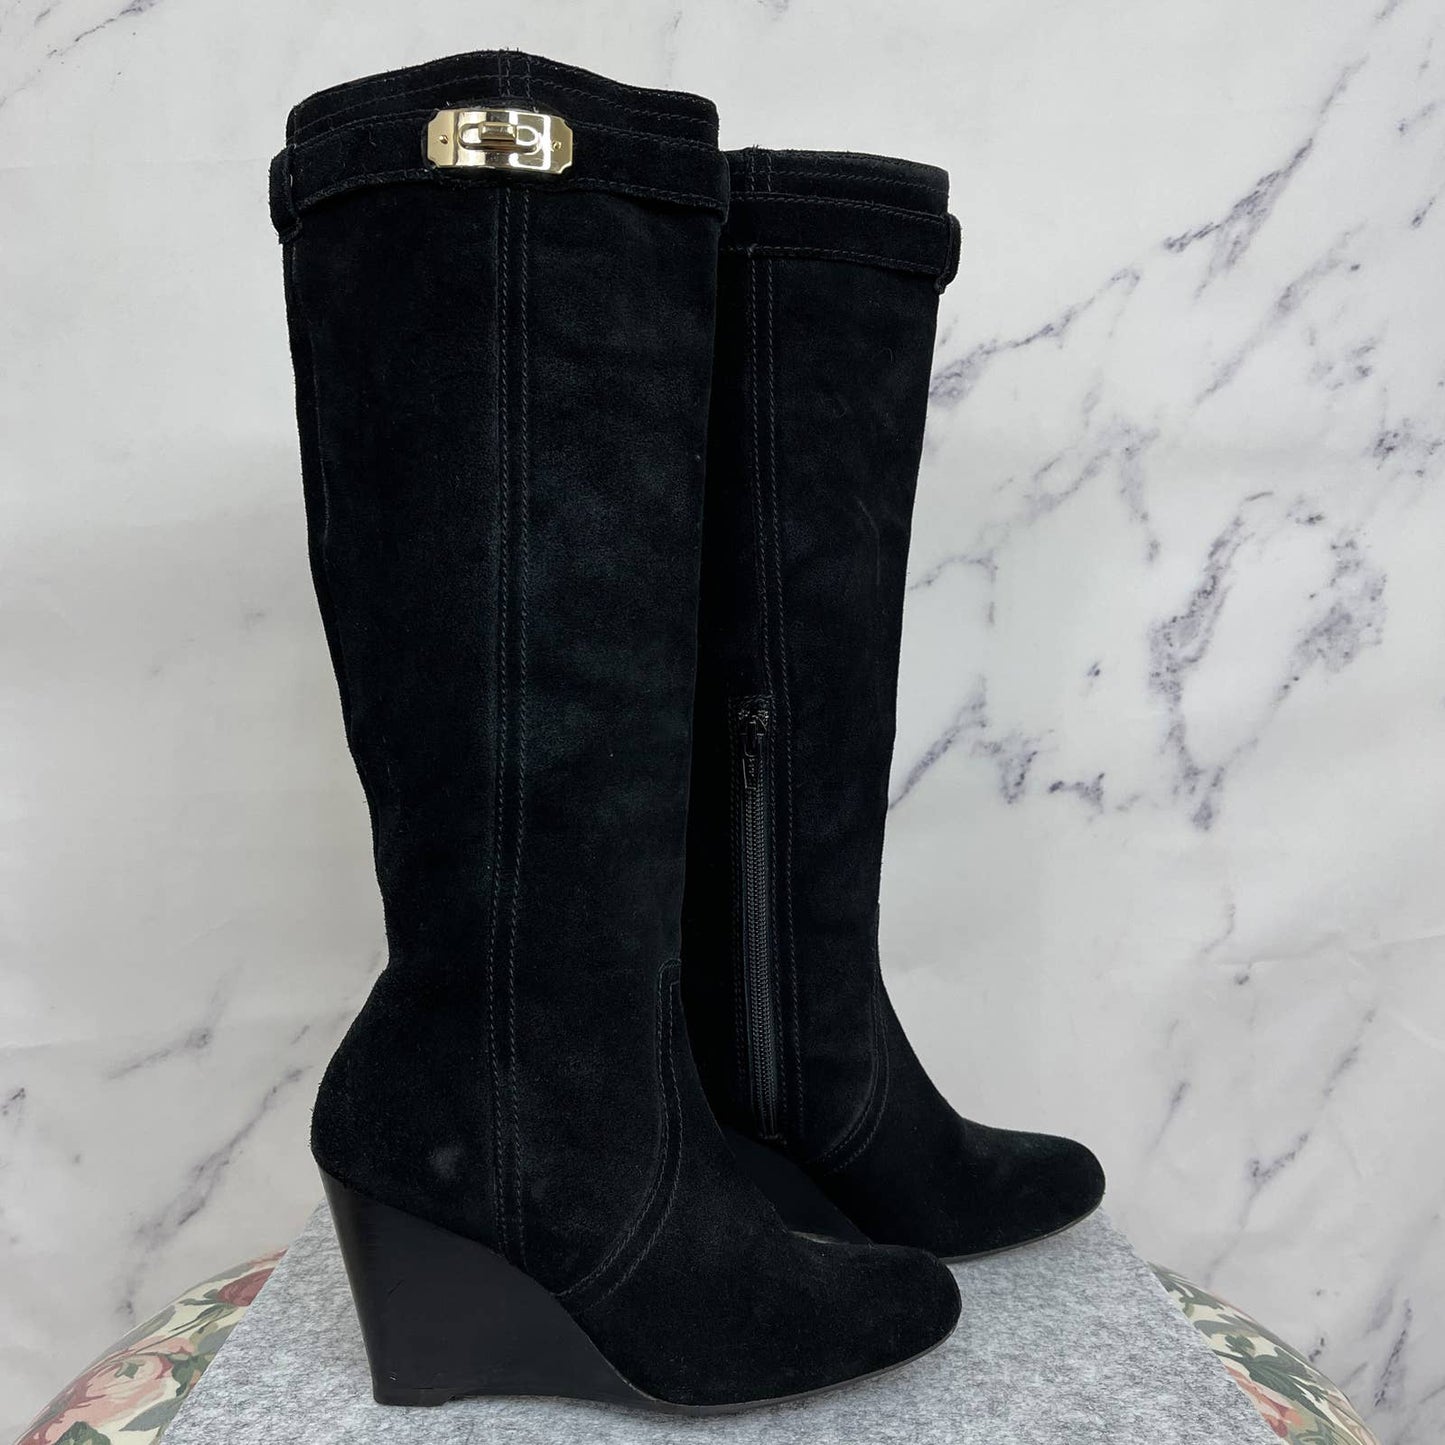 Coach | Angie Suede Wedge Heel Knee Length Boots